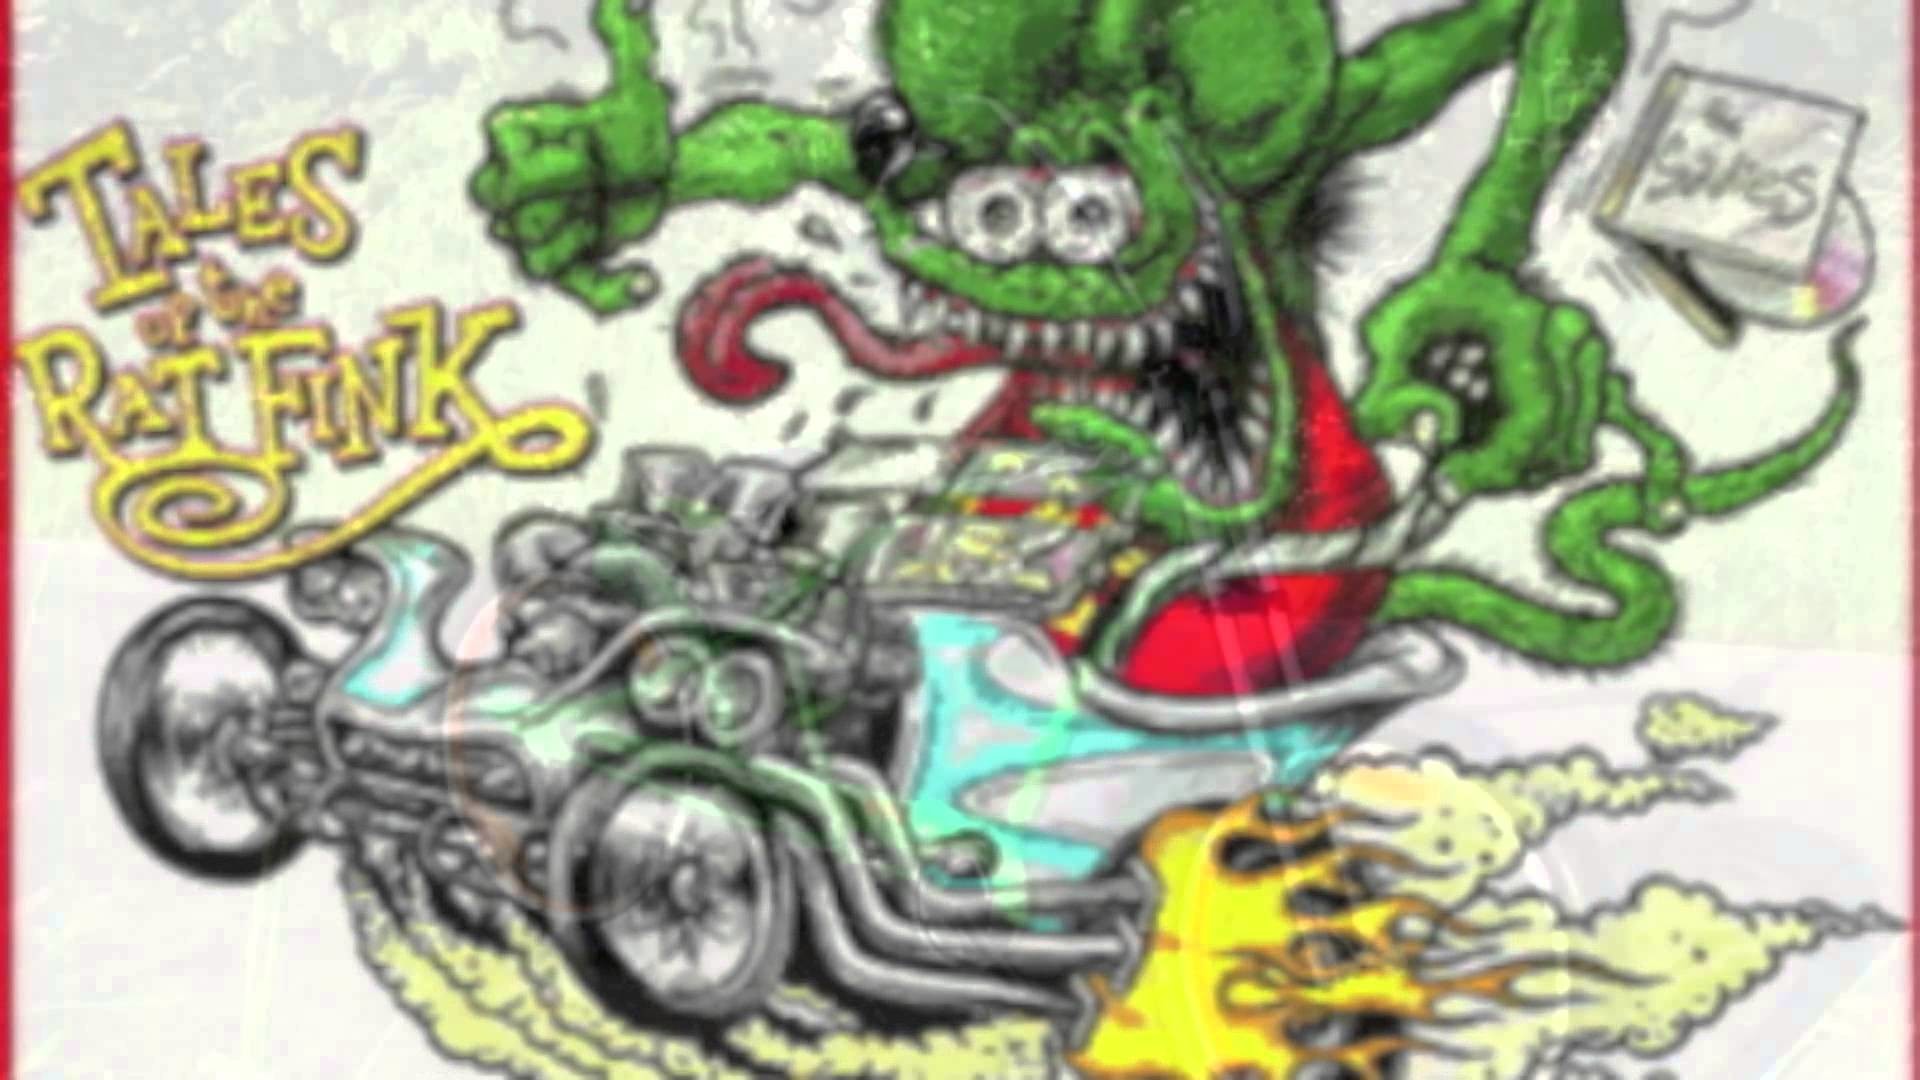 1920x1080 Davey Harp - "Rat Fink Bike" from the CD featuring the Hohner Harmonica -  YouTube